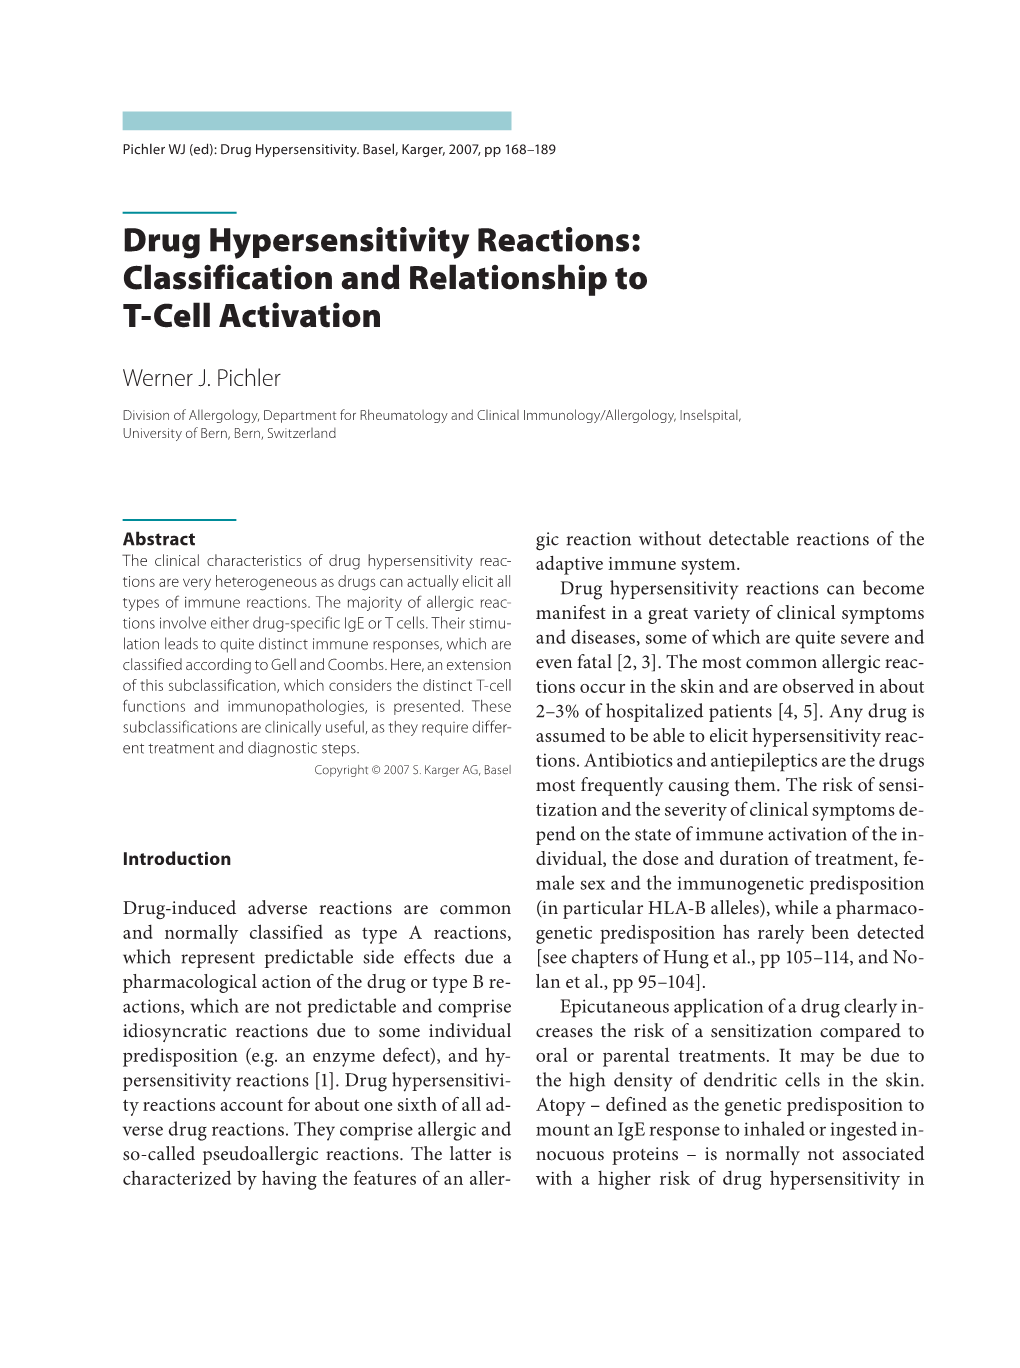 Drug Hypersensitivity Reactions: Classification and Relationship to T-Cell Activation